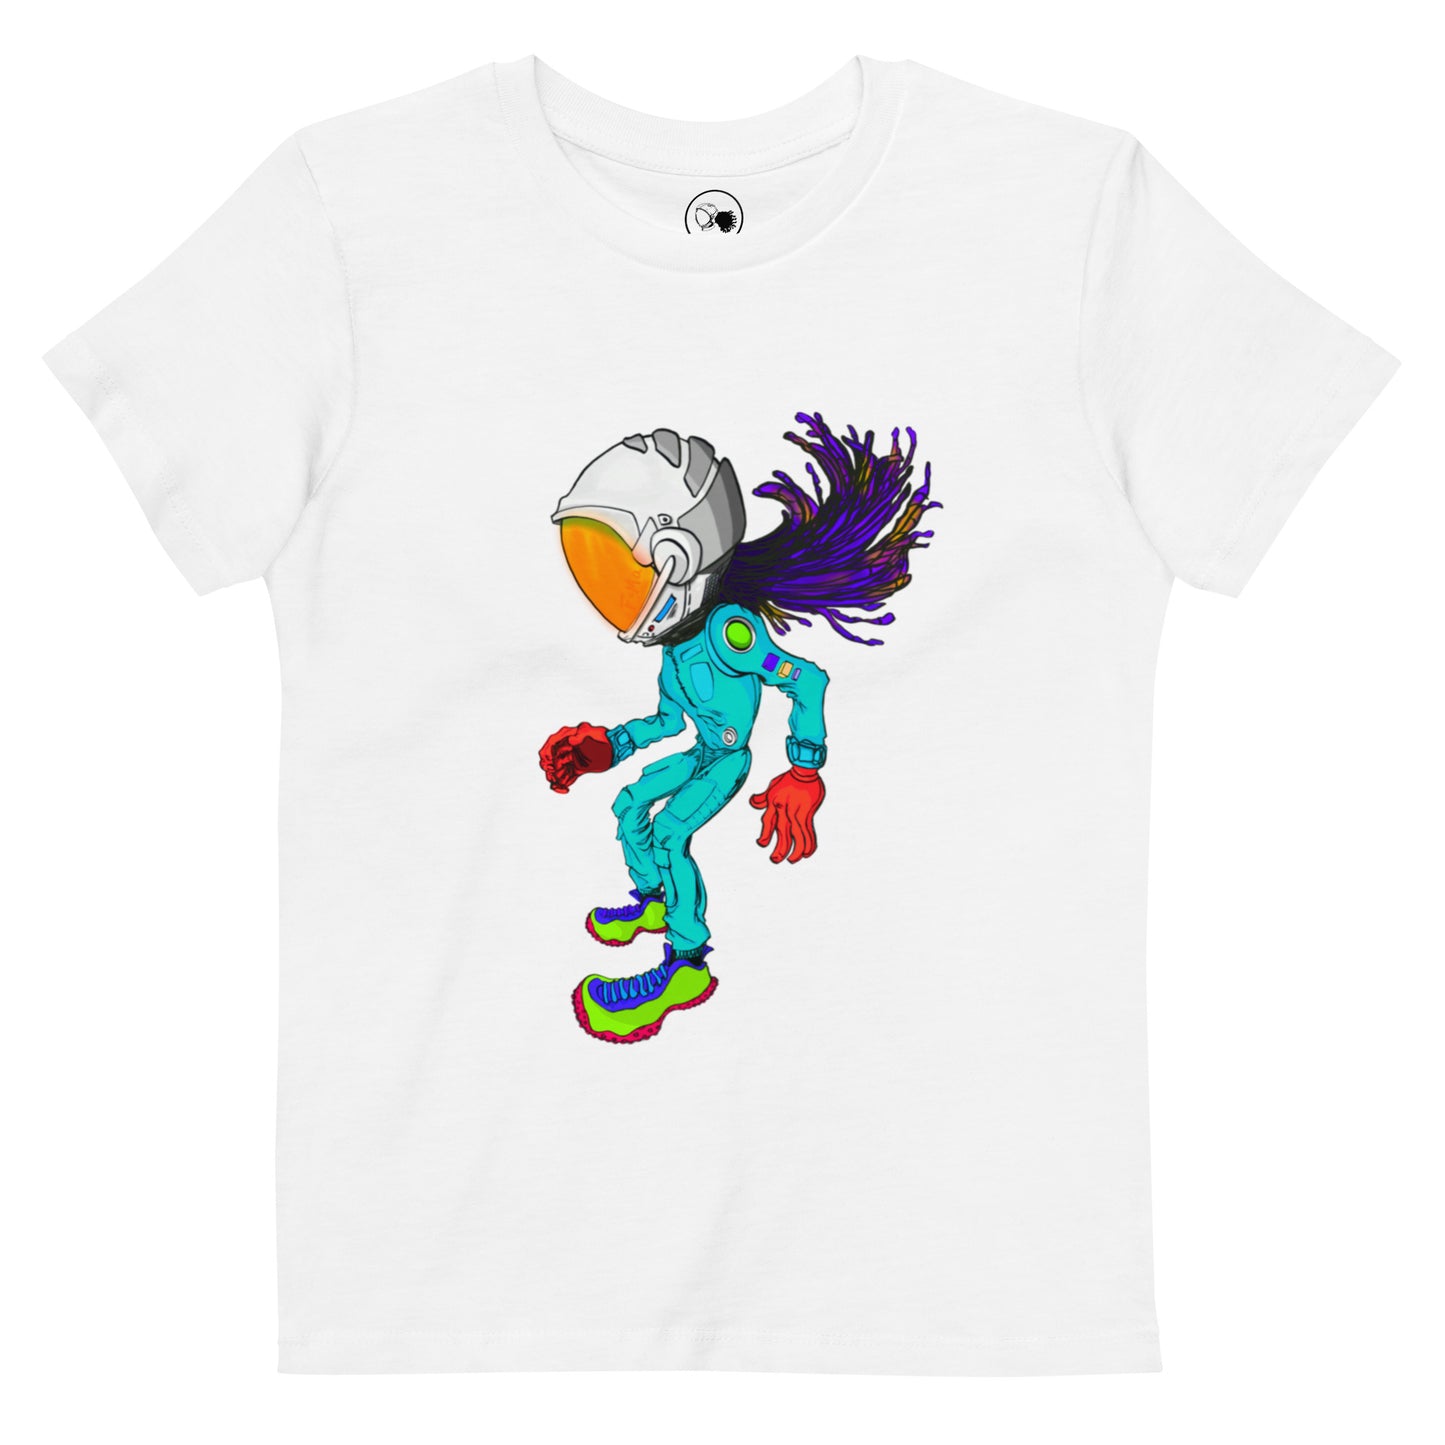 Floating Astronaut Kids T-Shirt (Turquoise)